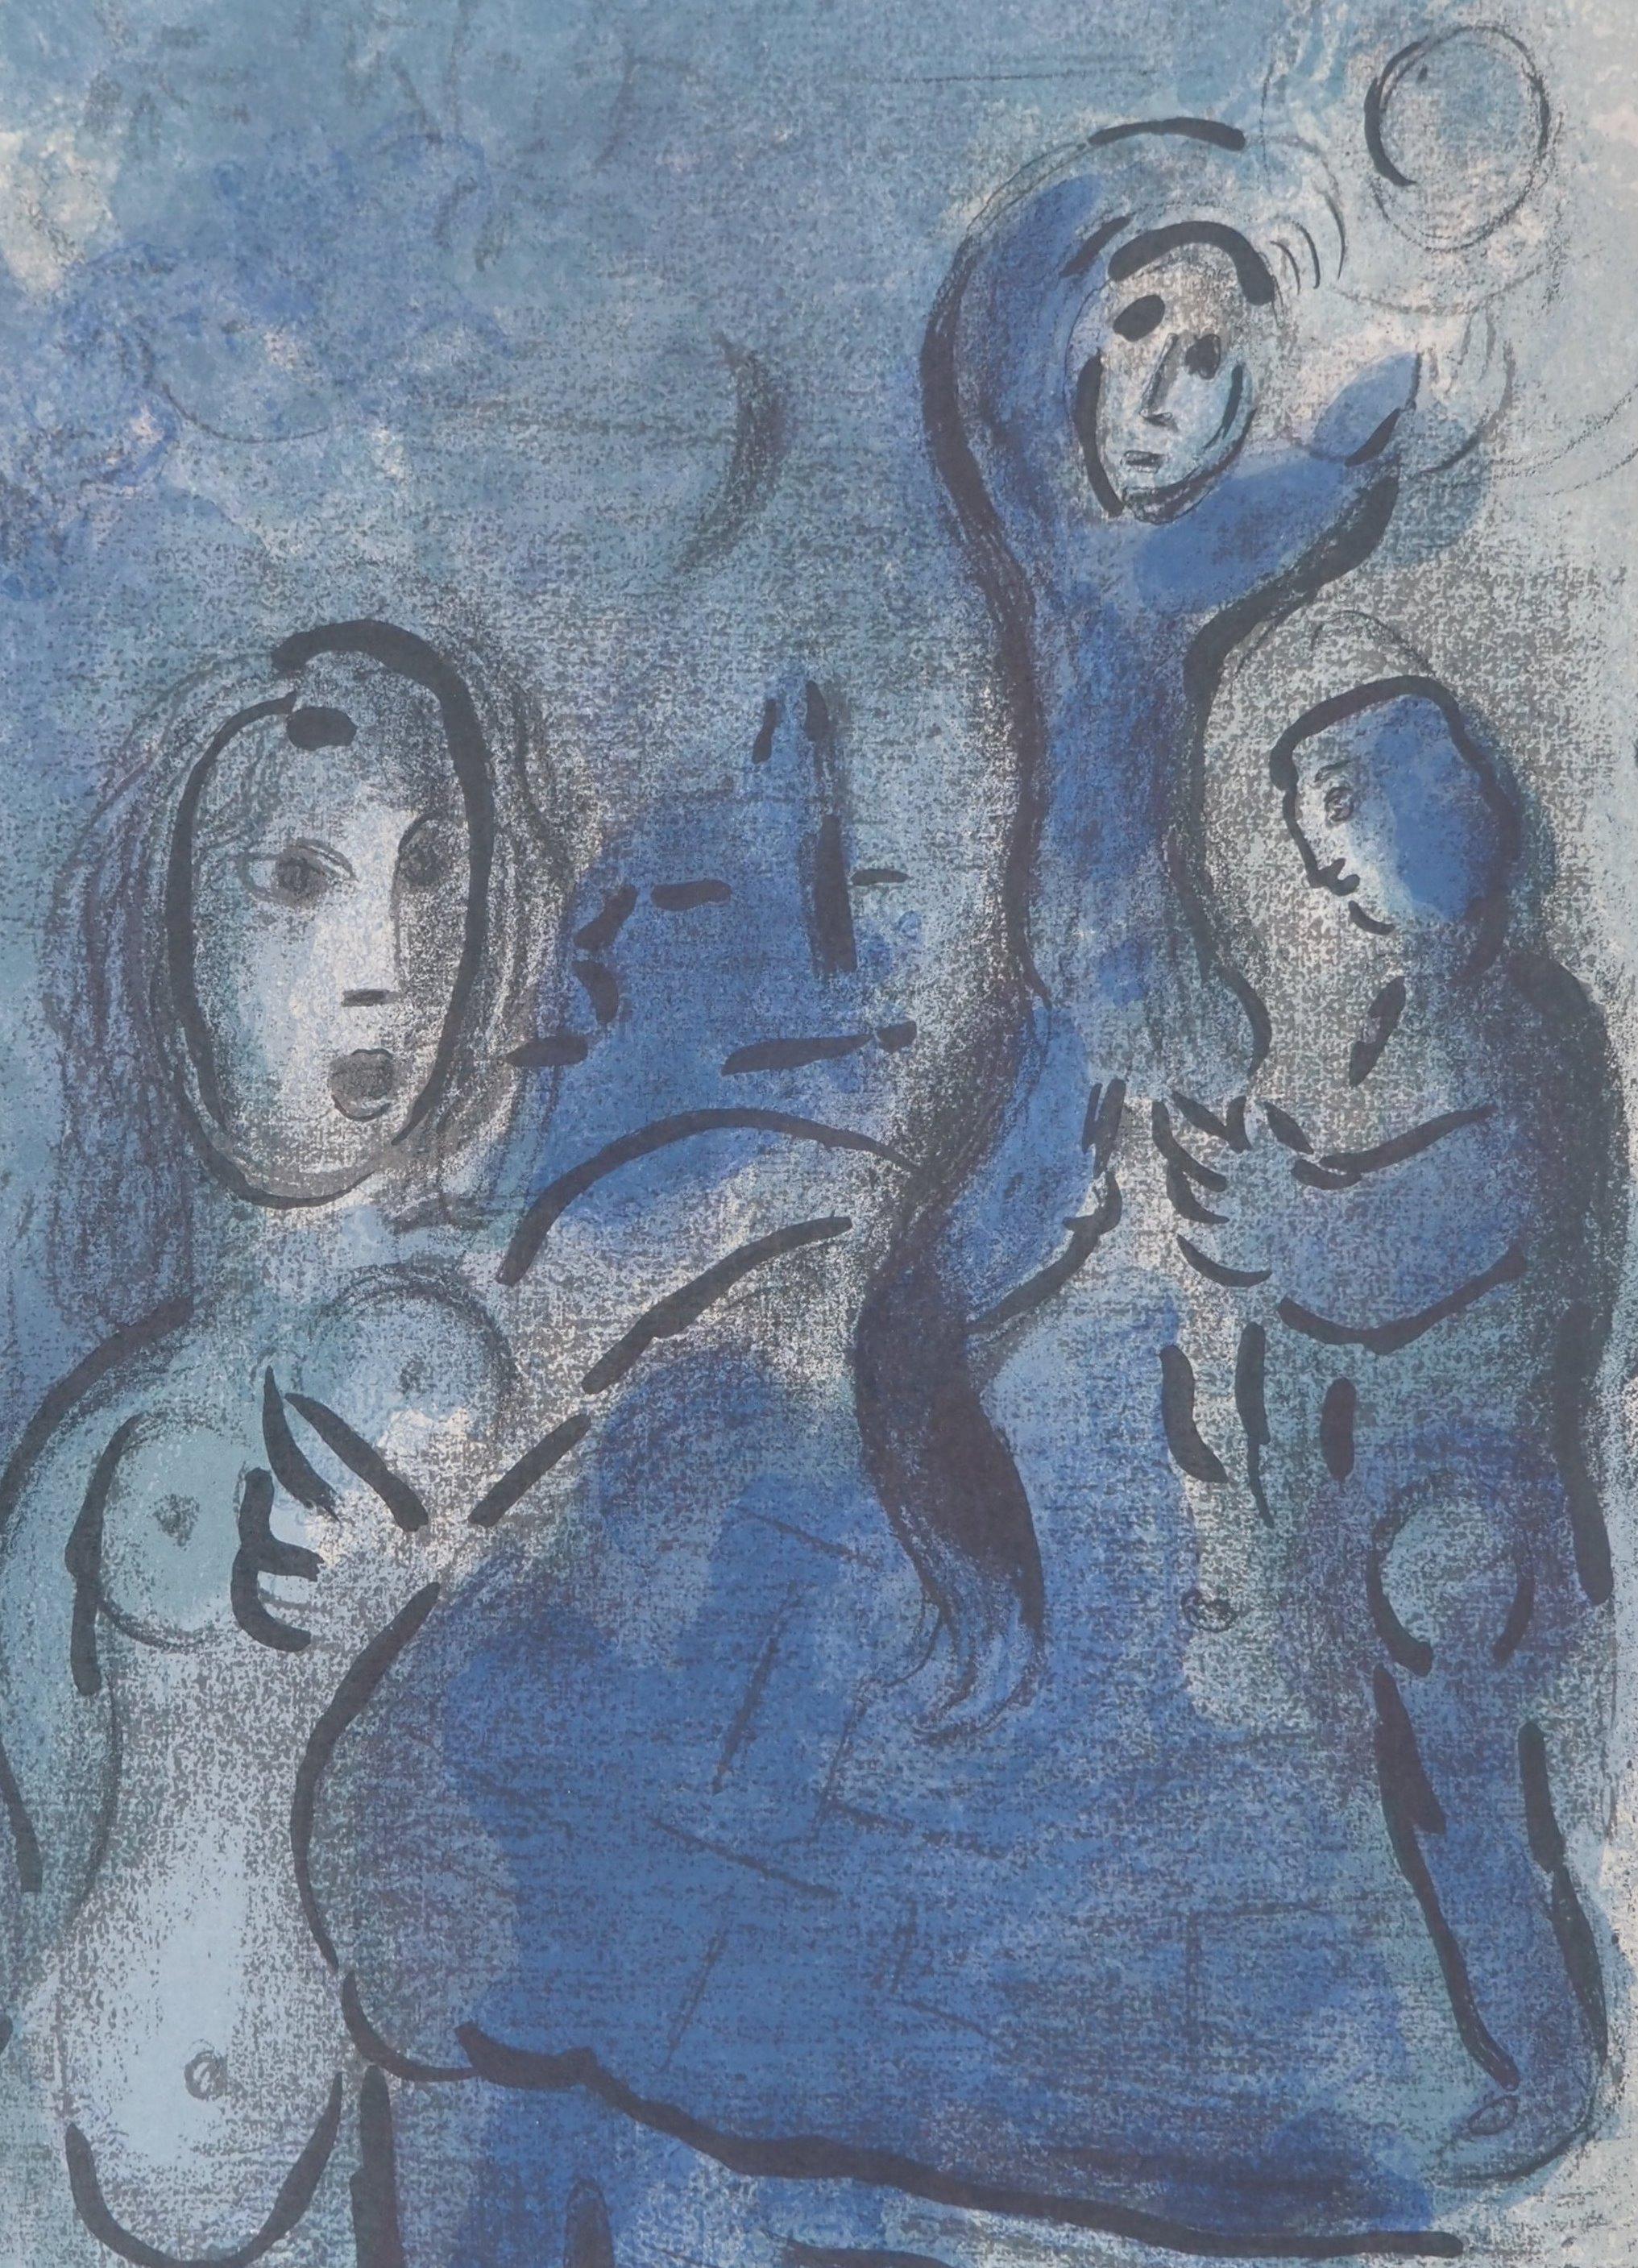 Marc Chagall (1887-1985) 
The Bible, Jericho's Spies in the Moolight, 1960

Original lithograph (Mourlot Workshop) 
On paper 36 x 26.5 cm (c. 14.2 x 10.2 in)
Second illustration on the back, see last picture (Mourlot #267) 

REFERENCE: 
Catalogue